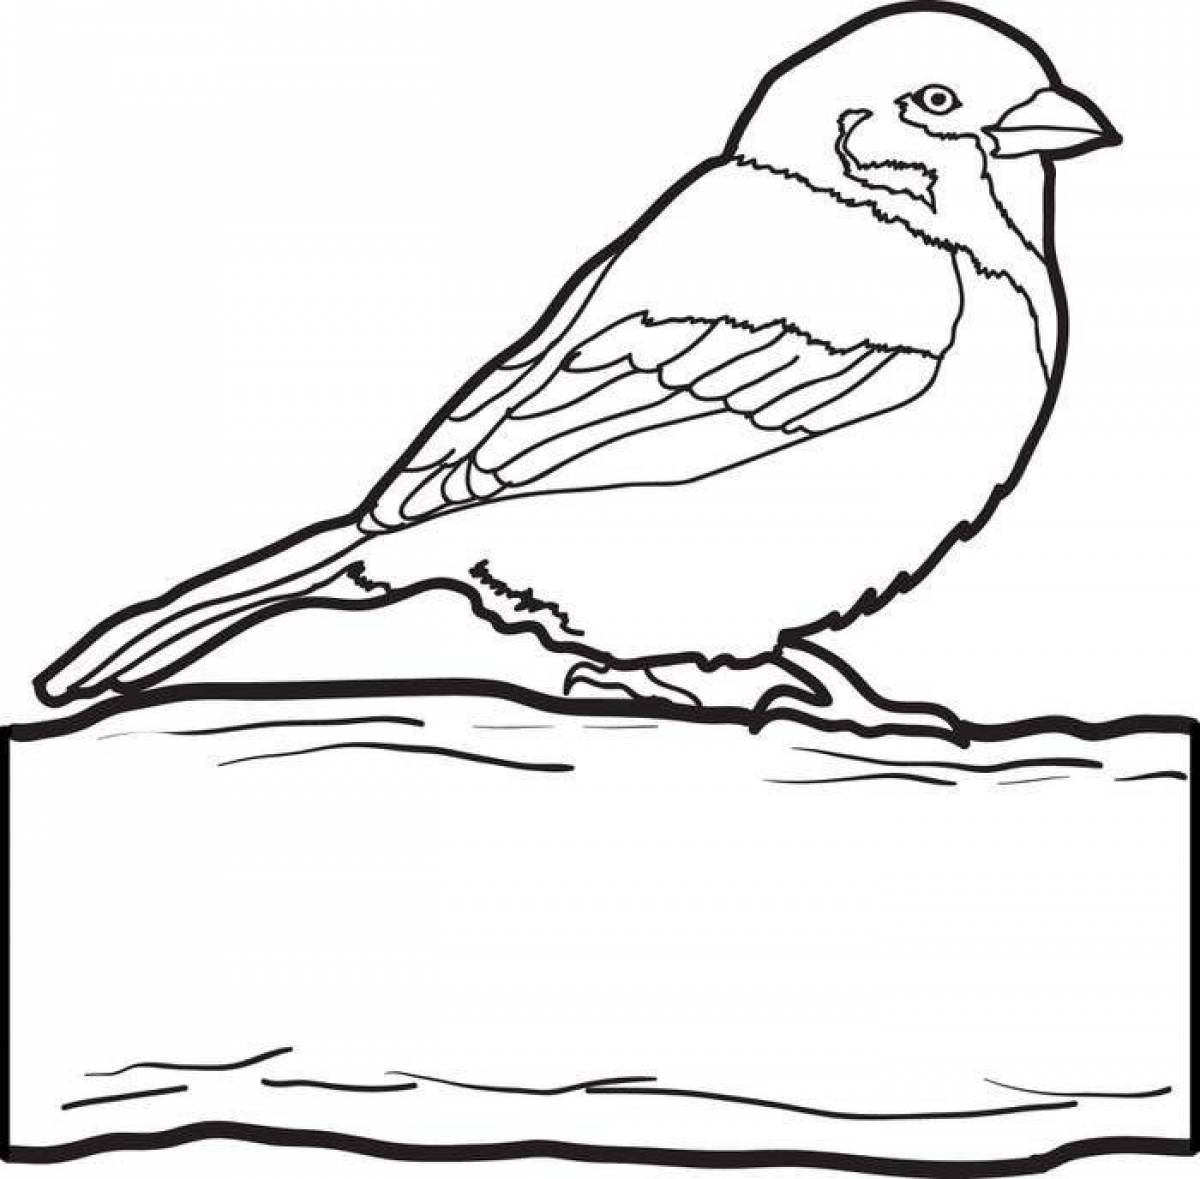 Exquisite sparrow coloring book for kids